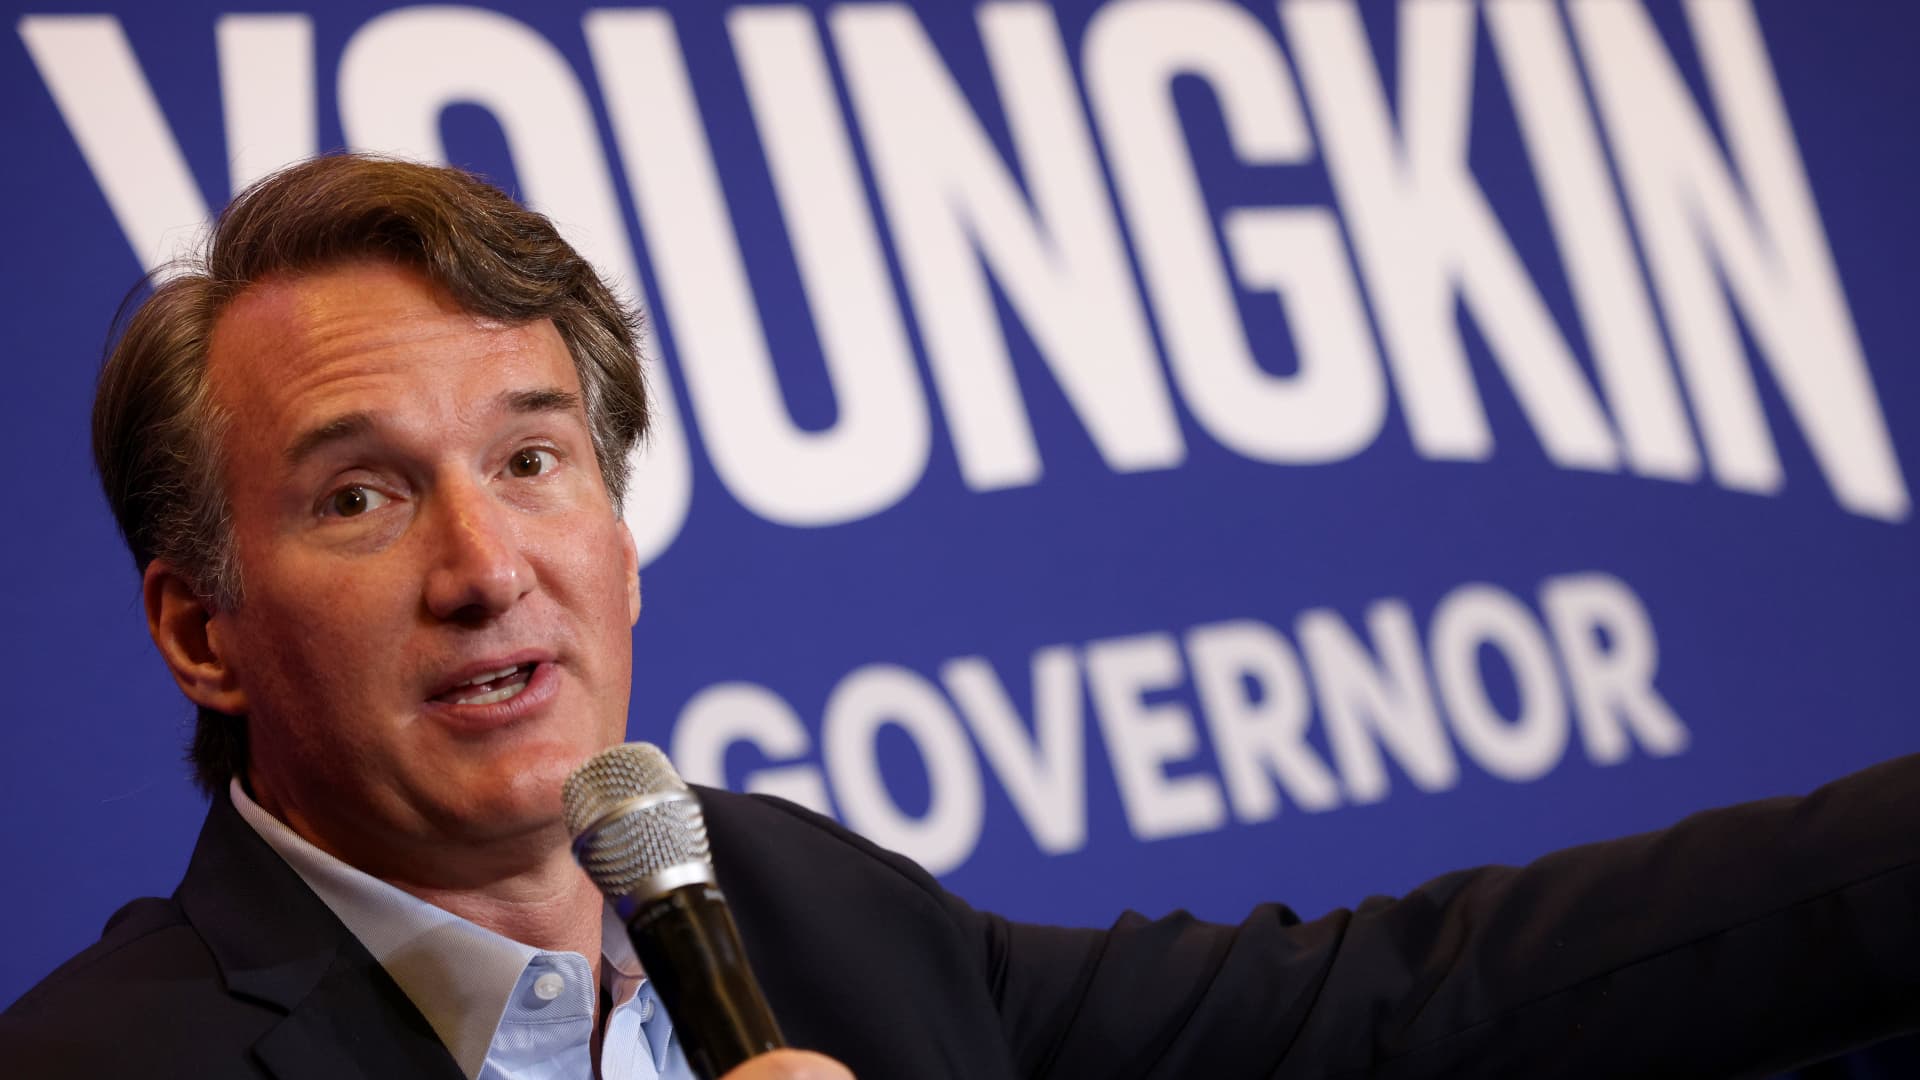 Virginia gubernatorial candidate Glenn Youngkin (R-VA) speaks during a campaign event on July 14, 2021 in McLean, Virginia.